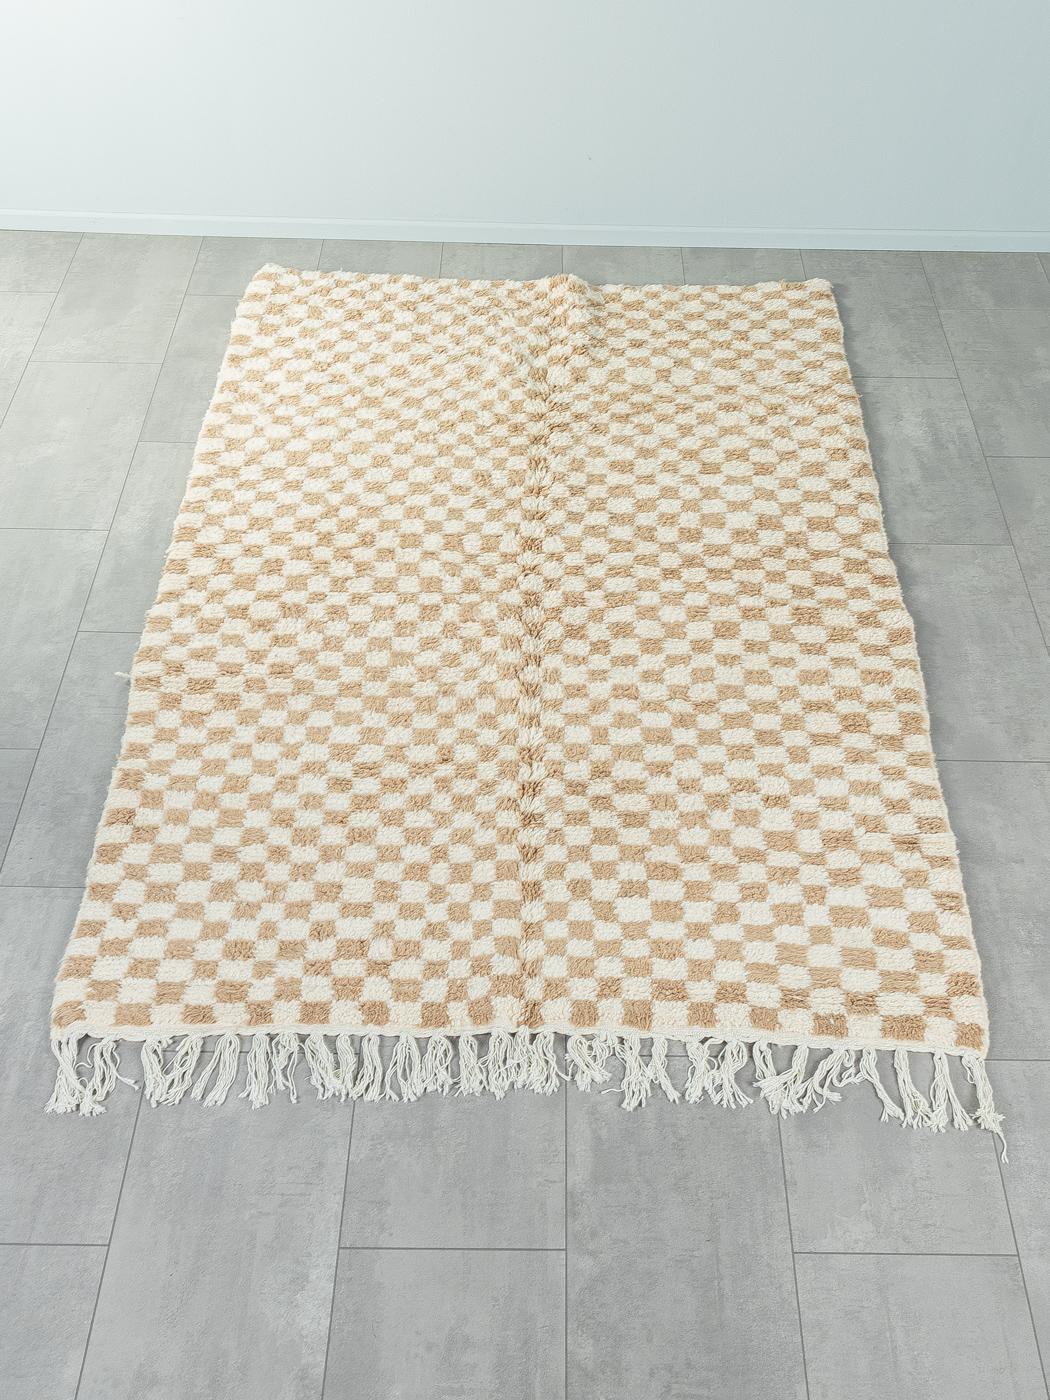 Tiny Sand Check is a contemporary 100% wool rug – thick and soft, comfortable underfoot. Our Berber rugs are handwoven and handknotted by Amazigh women in the Atlas Mountains. These communities have been crafting rugs for thousands of years. One